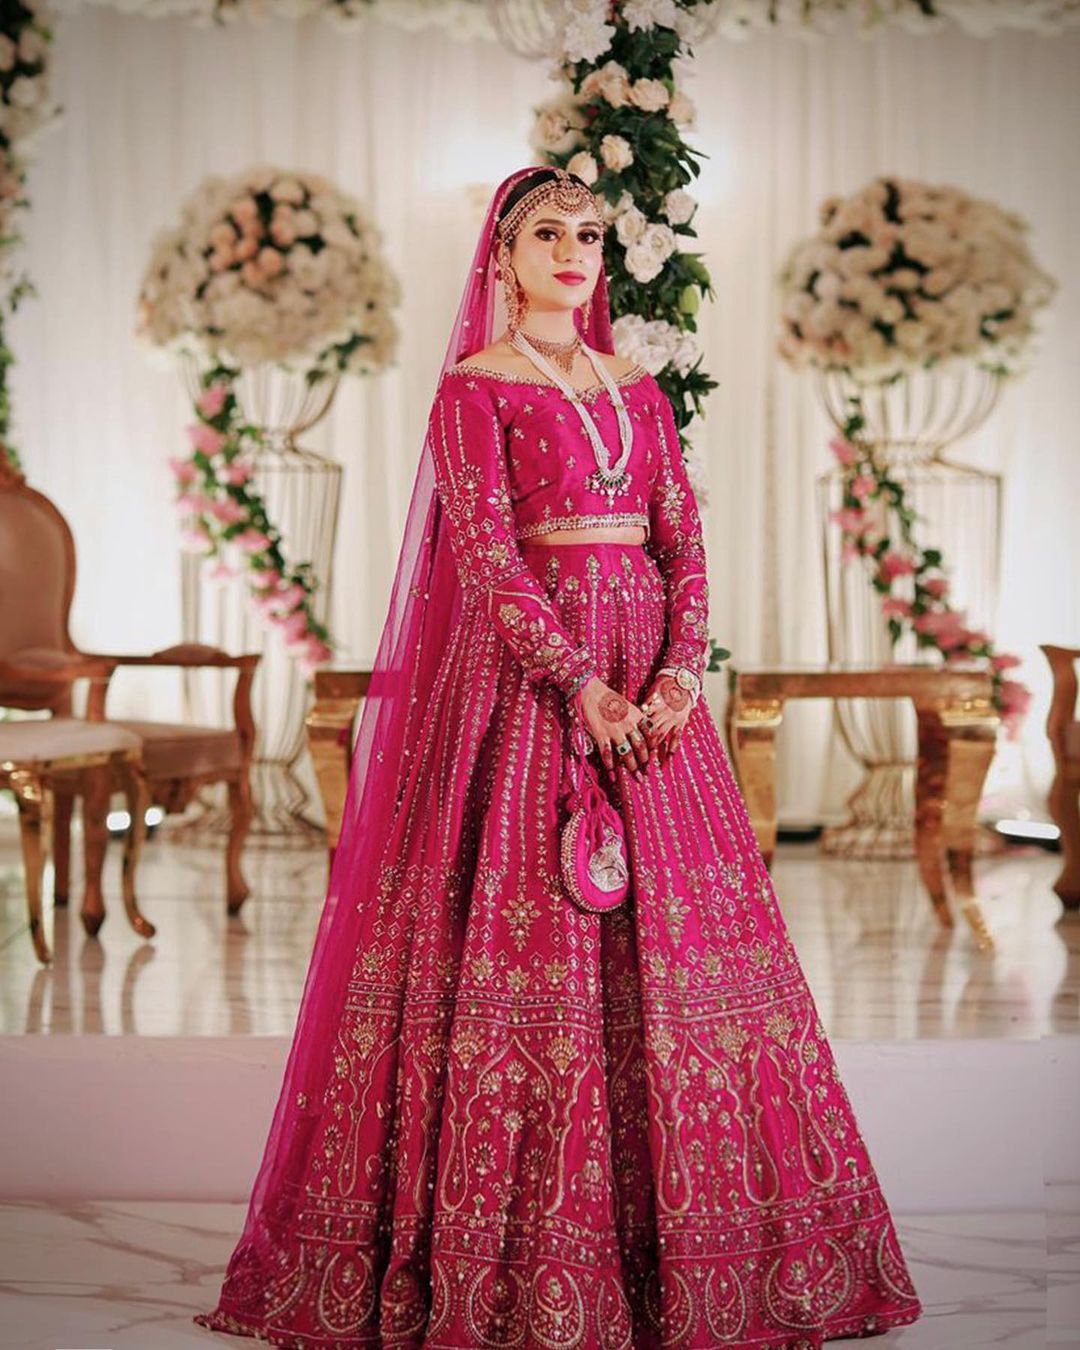 Bills Red Bridal Lehenga With Hand Embroidery | Singhania's